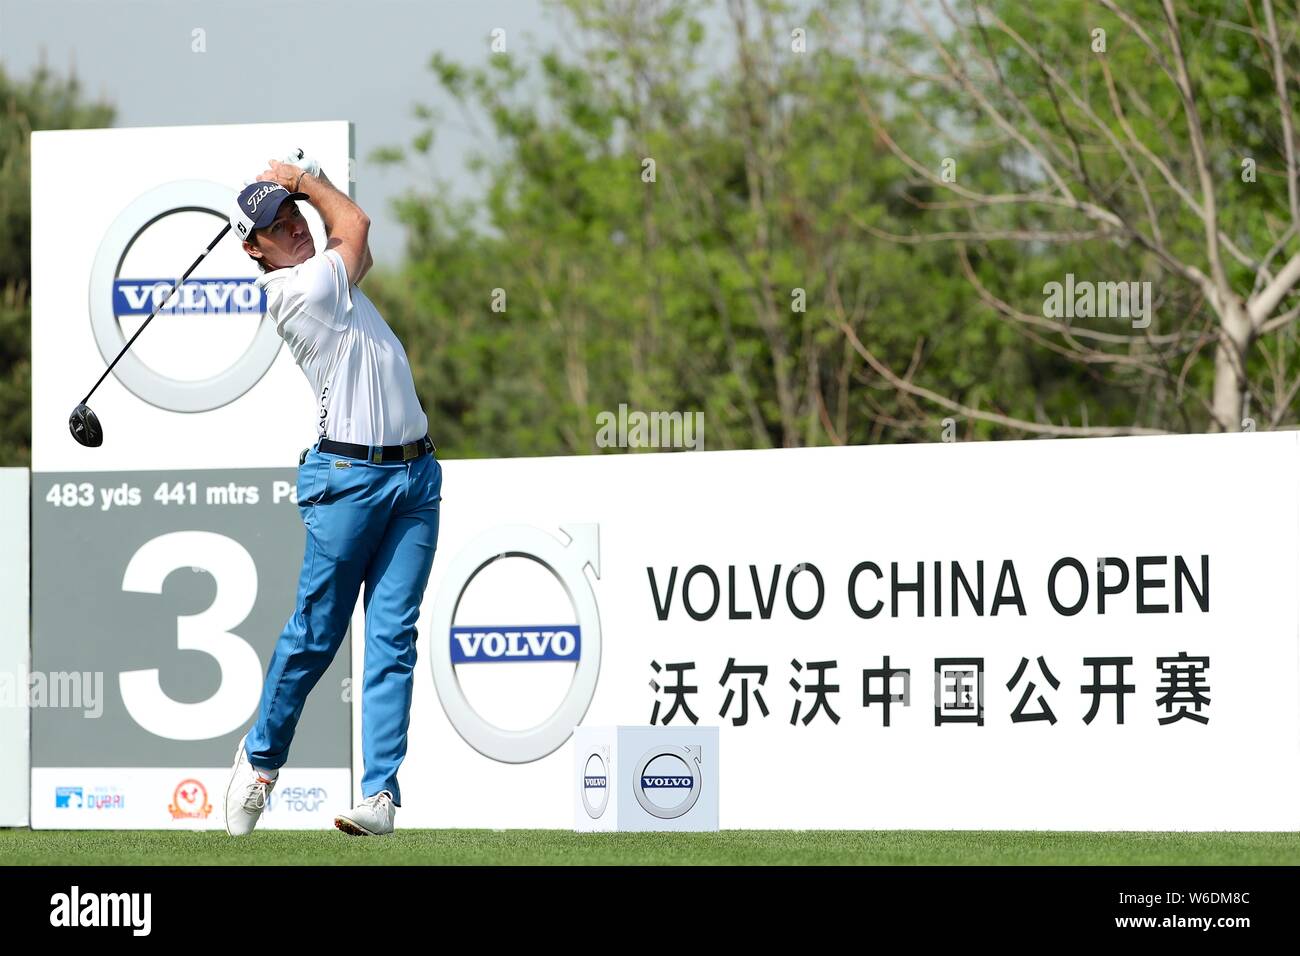 Julien Guerrier of France competes in the second round of the 2018 Volvo China Open golf tournament in Beijing, China, 27 April 2018. *** Local Captio Stock Photo